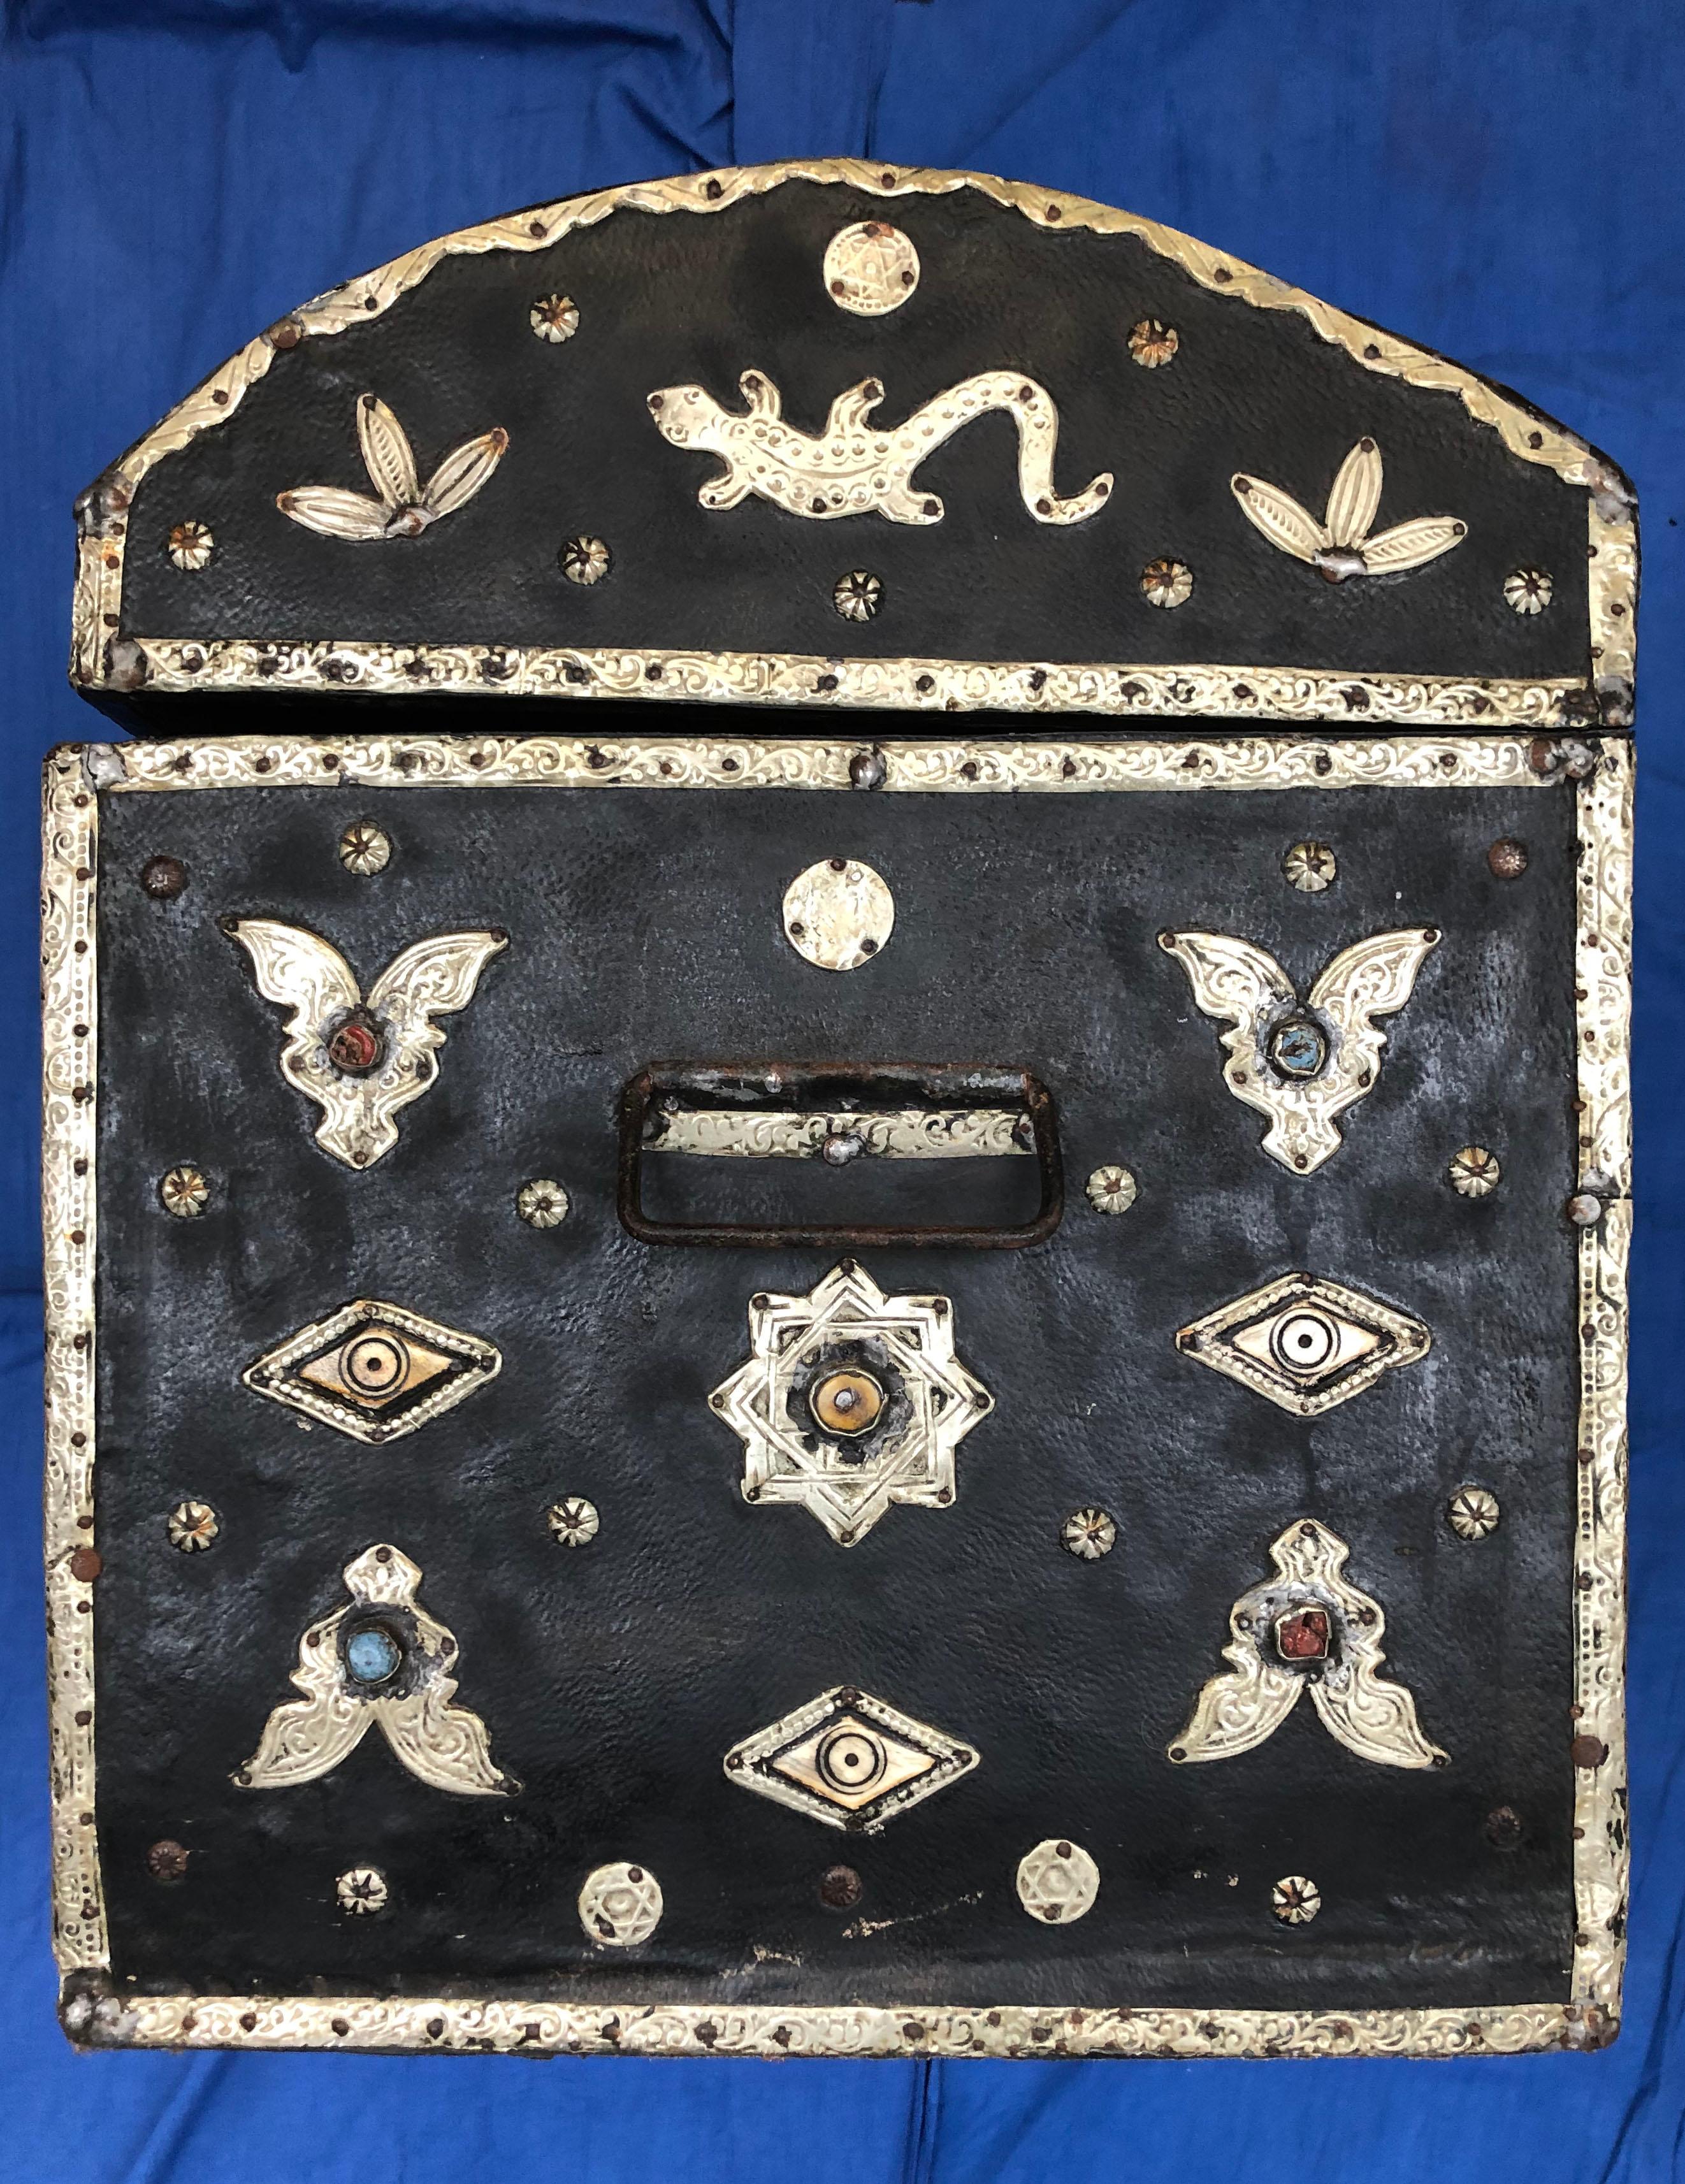 Early 1900s Moroccan Chest - Leather, Bone, Silver, Gems, Hamsa - Luxe Boho Chic (Stammeskunst) im Angebot